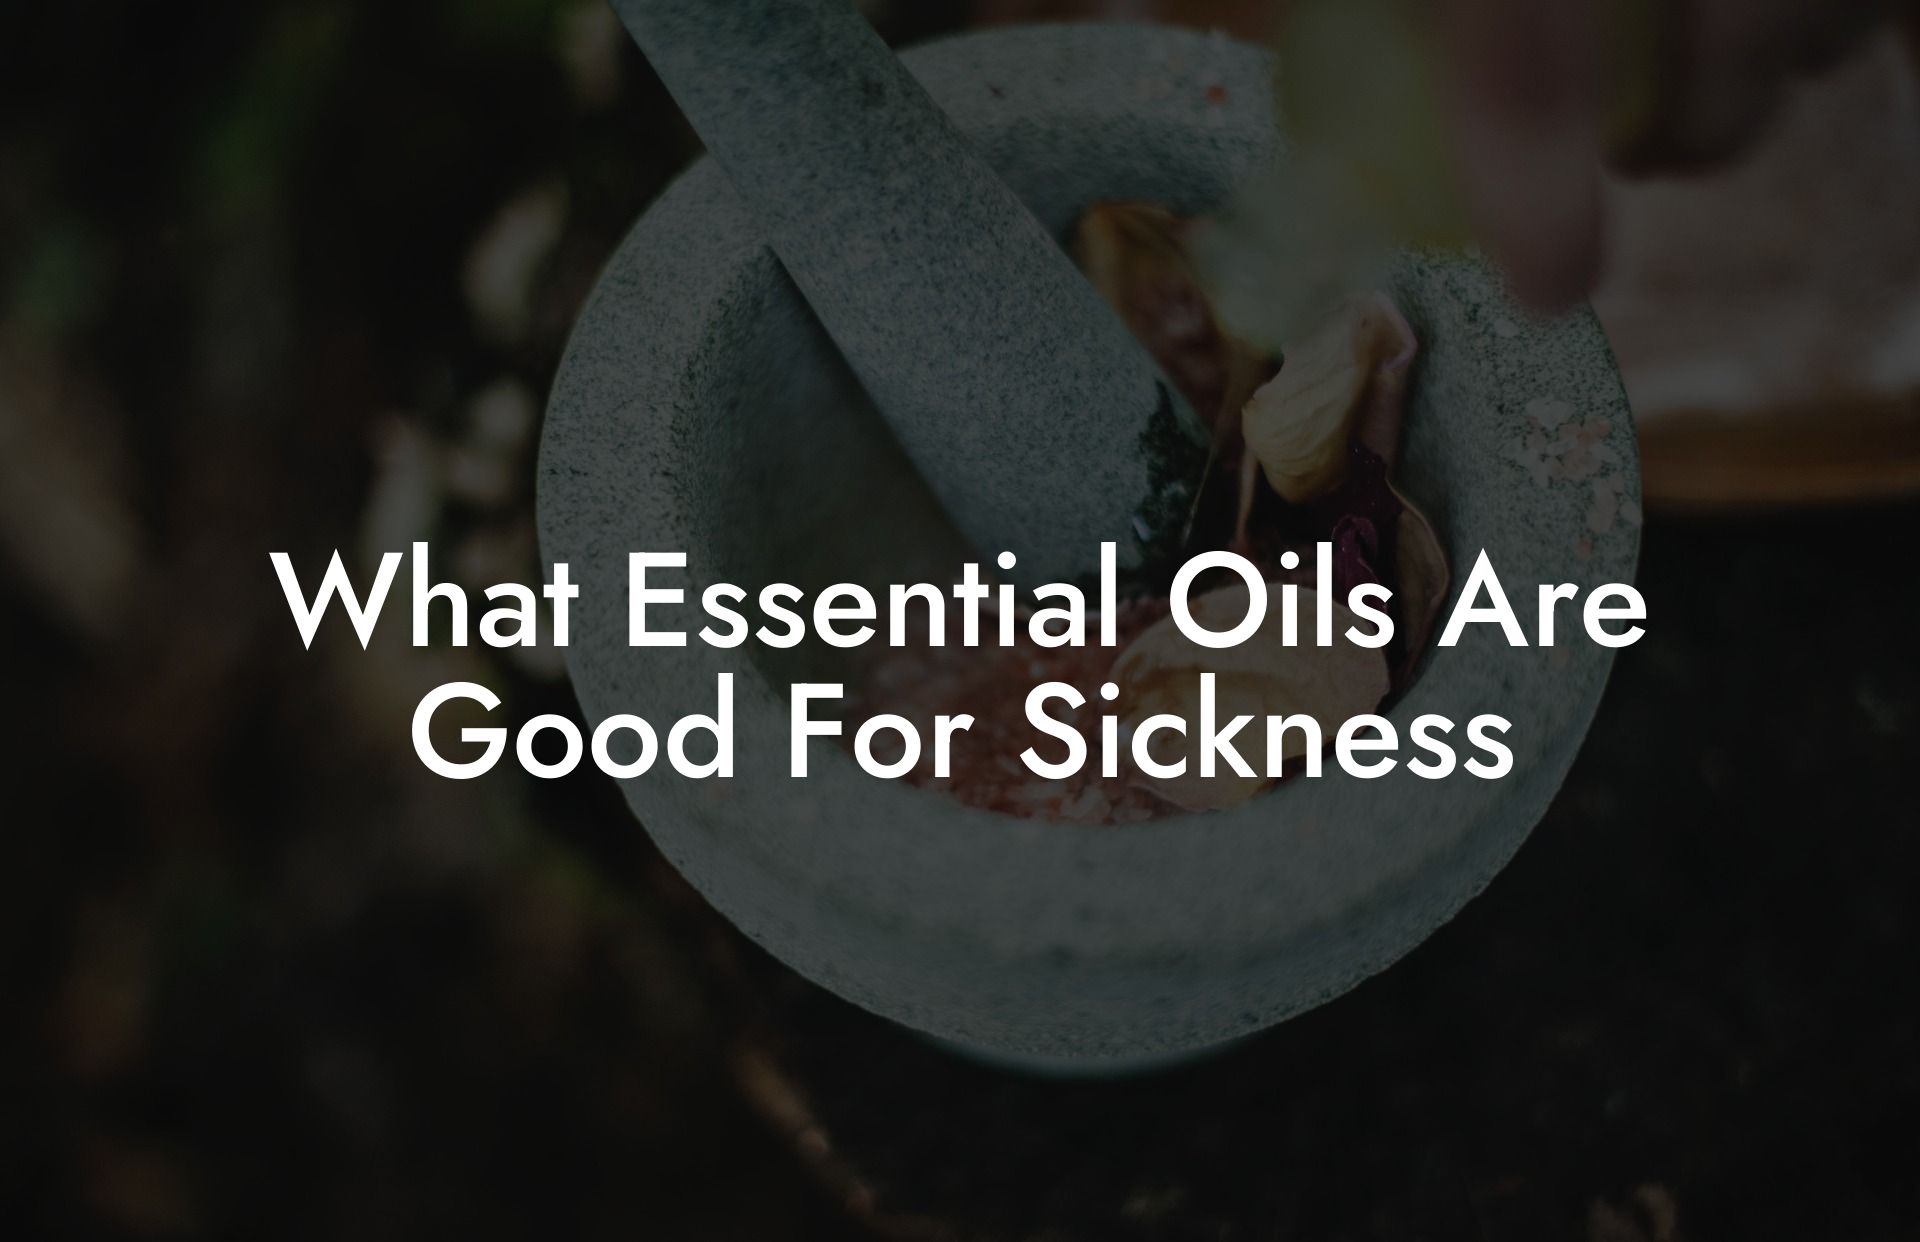 What Essential Oils Are Good For Sickness